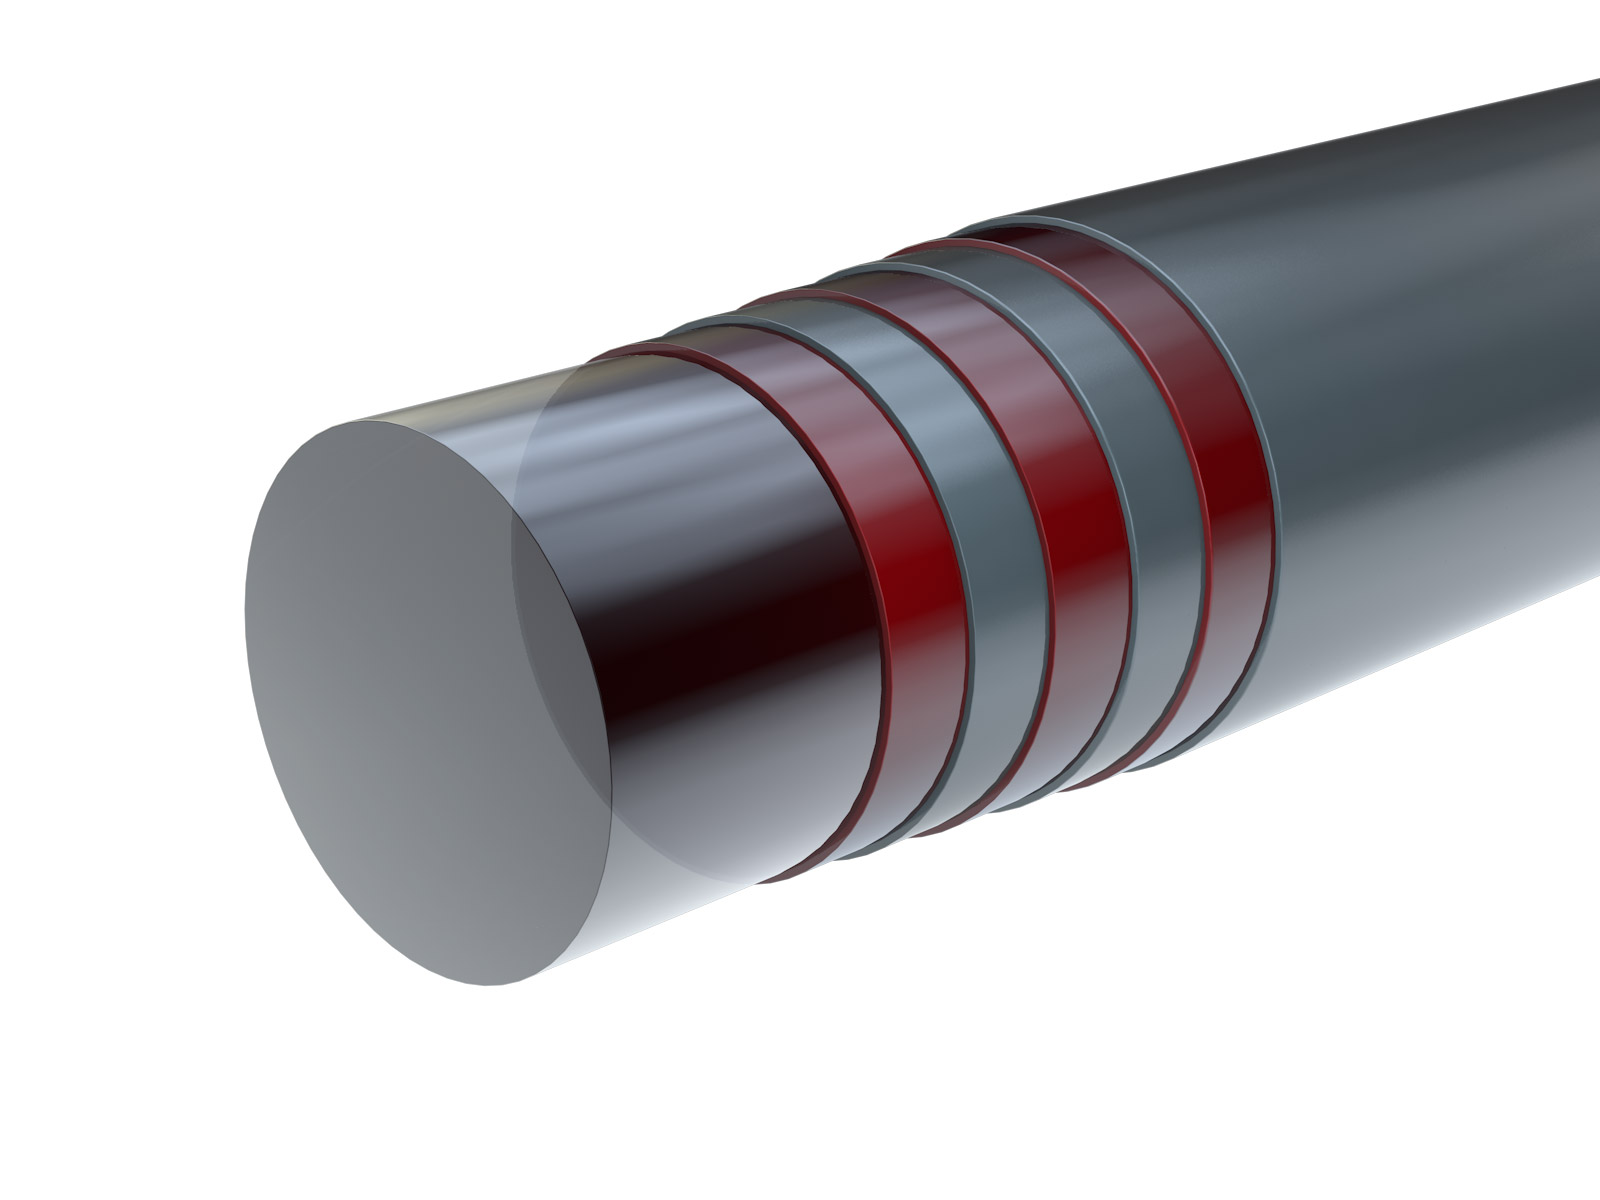 3D model of an optical fiber clad with multiple homogeneous layers.